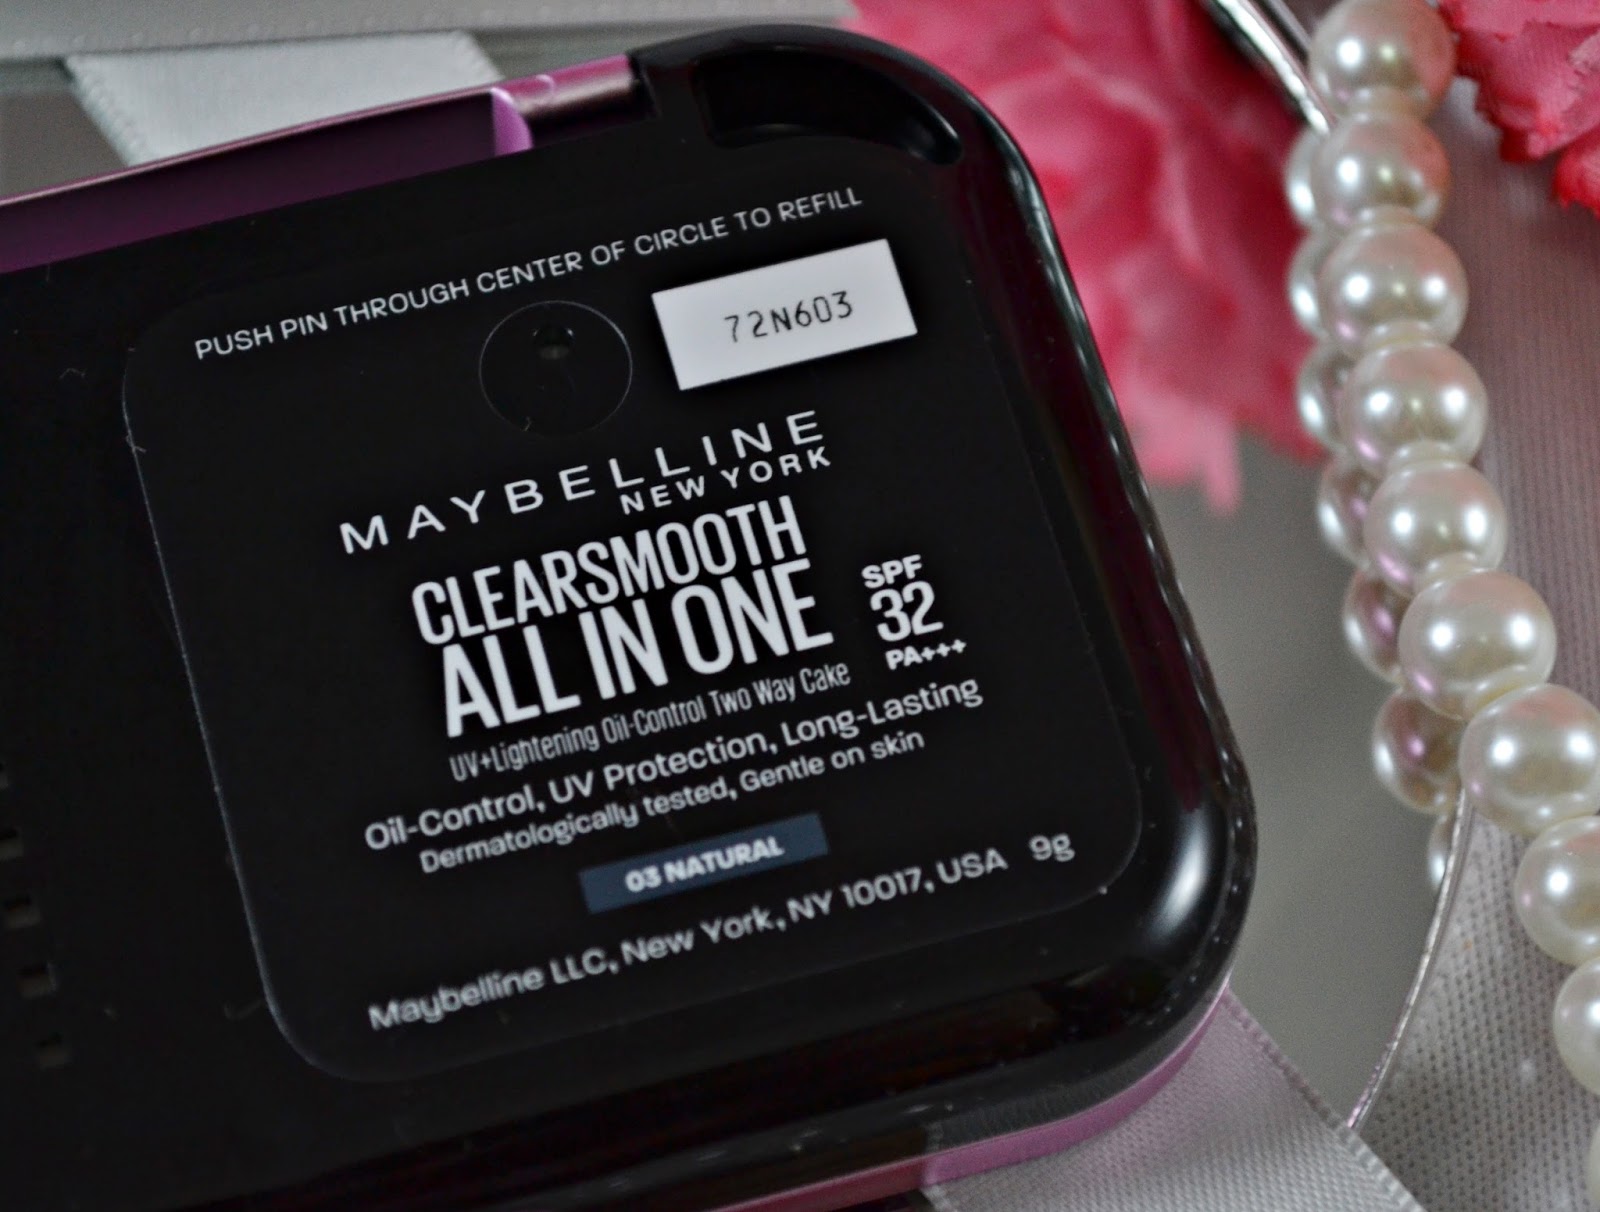 All smooth maybelline one clear in